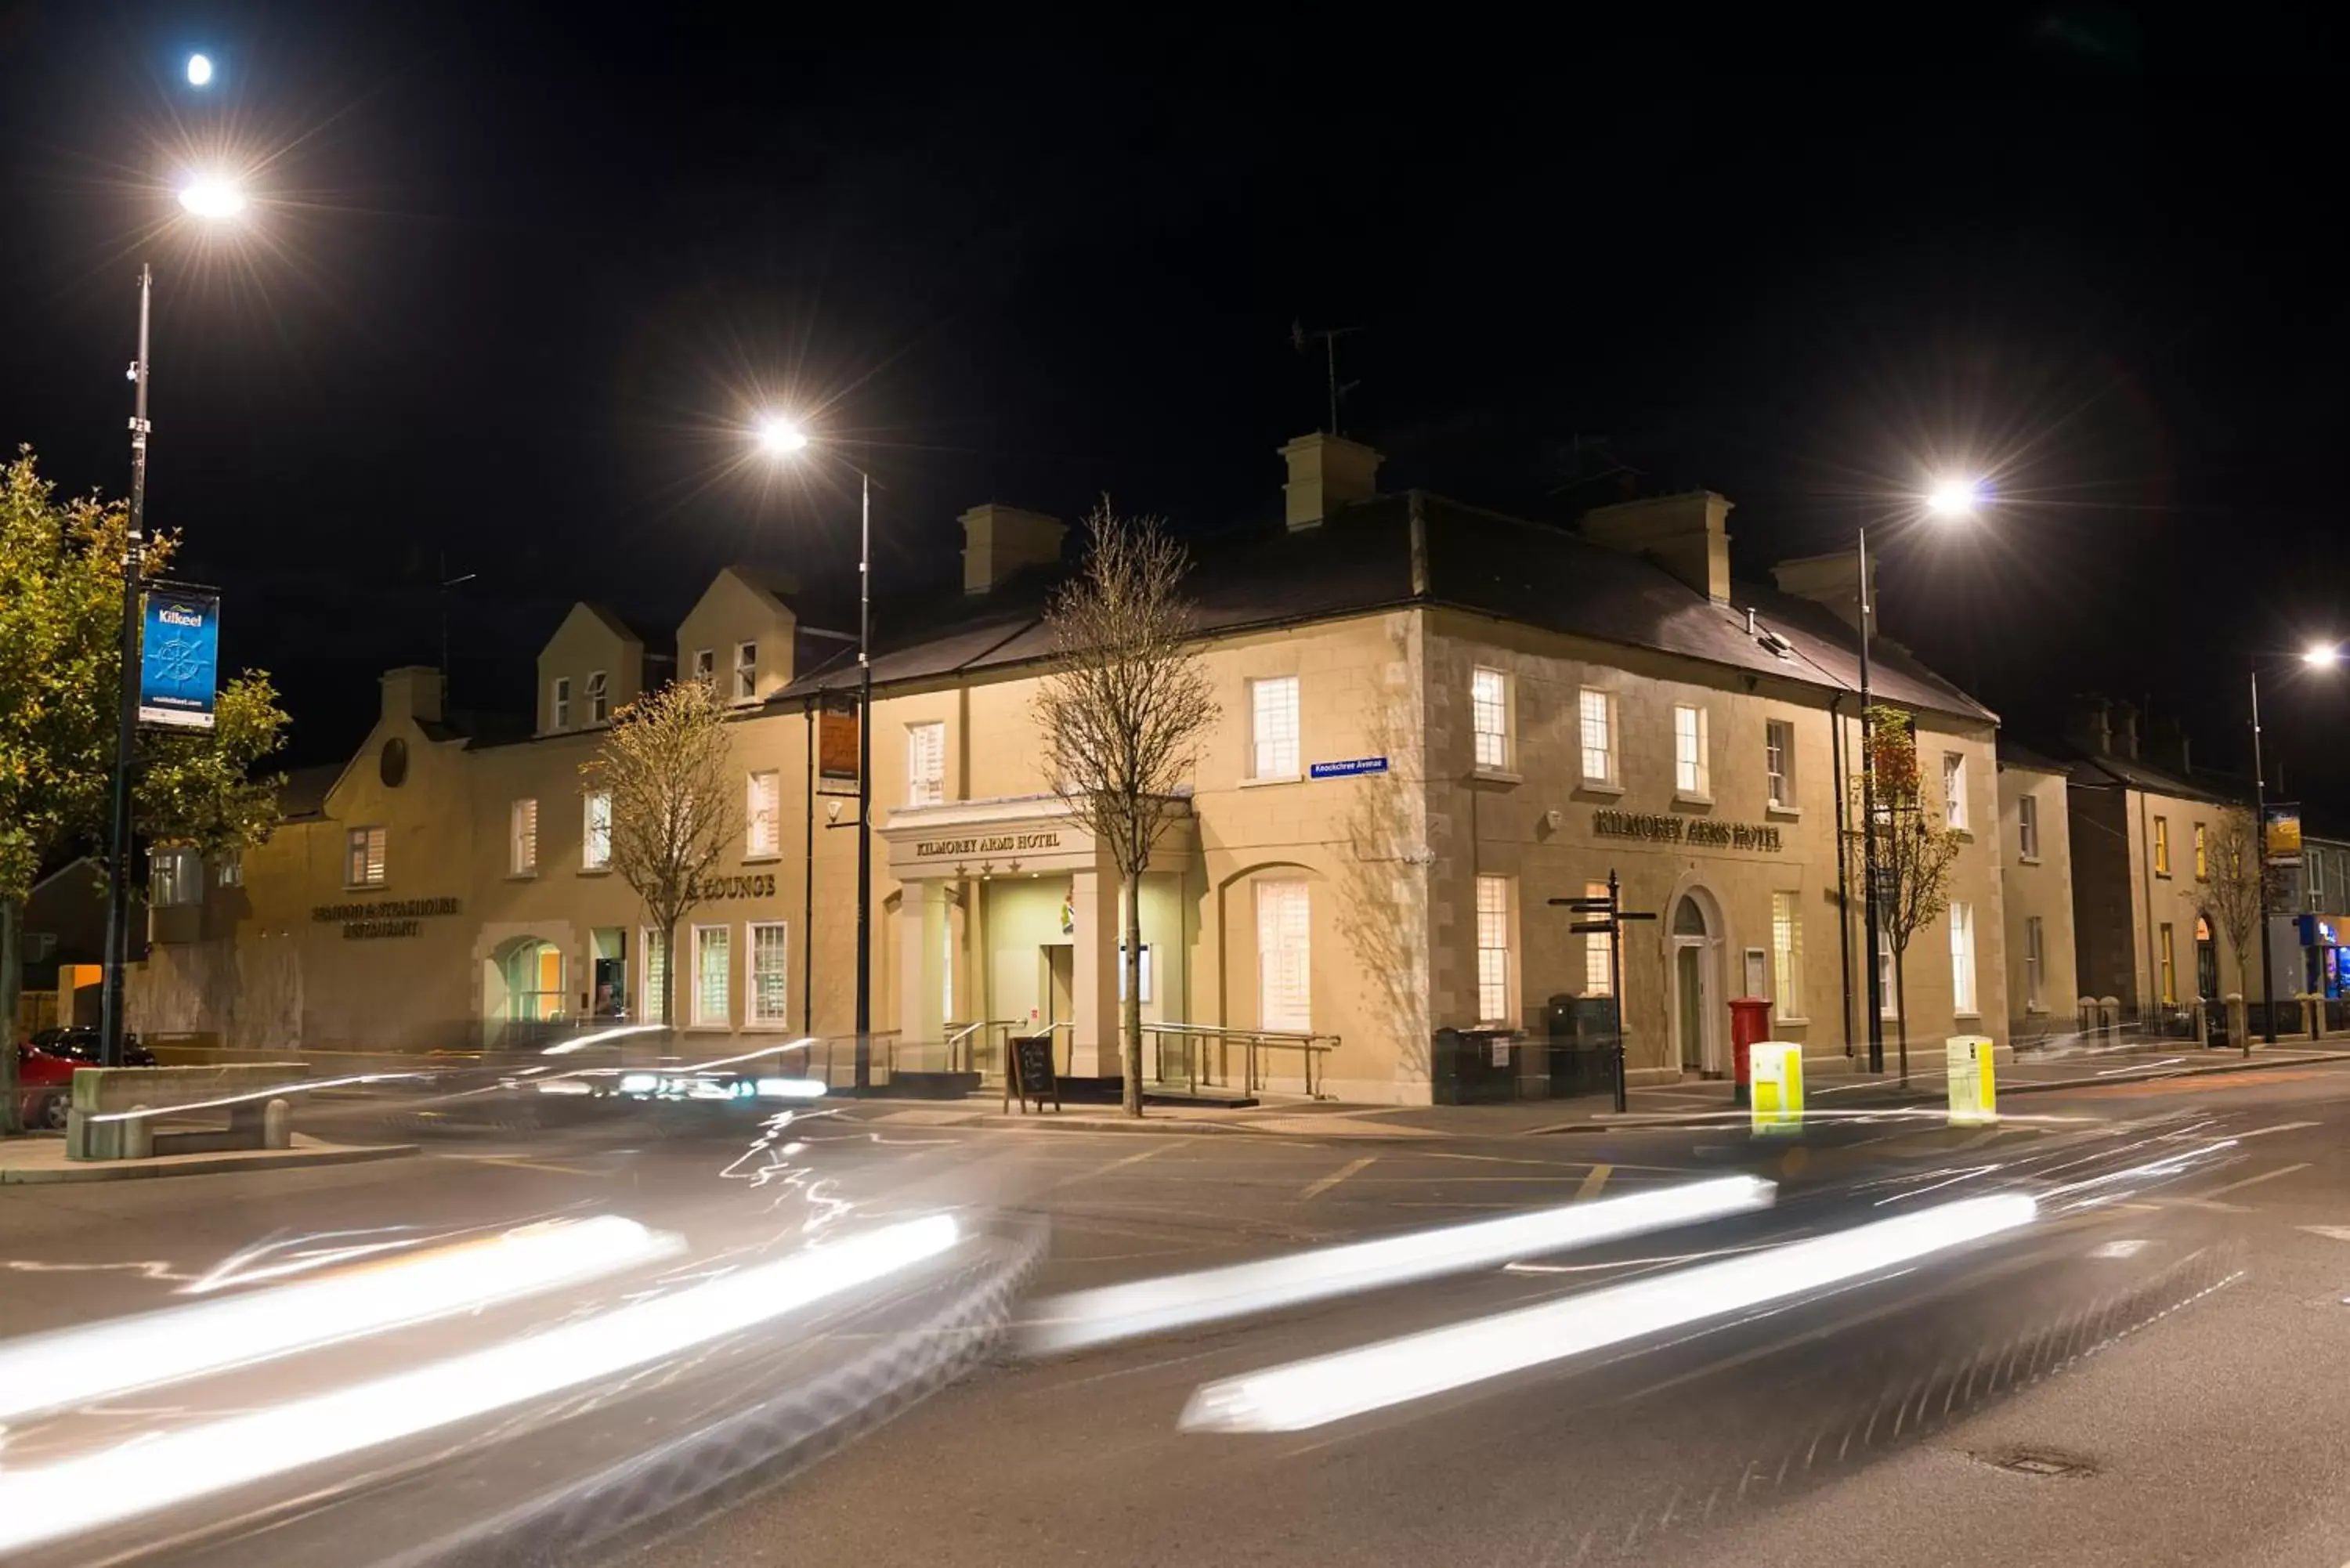 Street view, Property Building in Kilmorey Arms Hotel